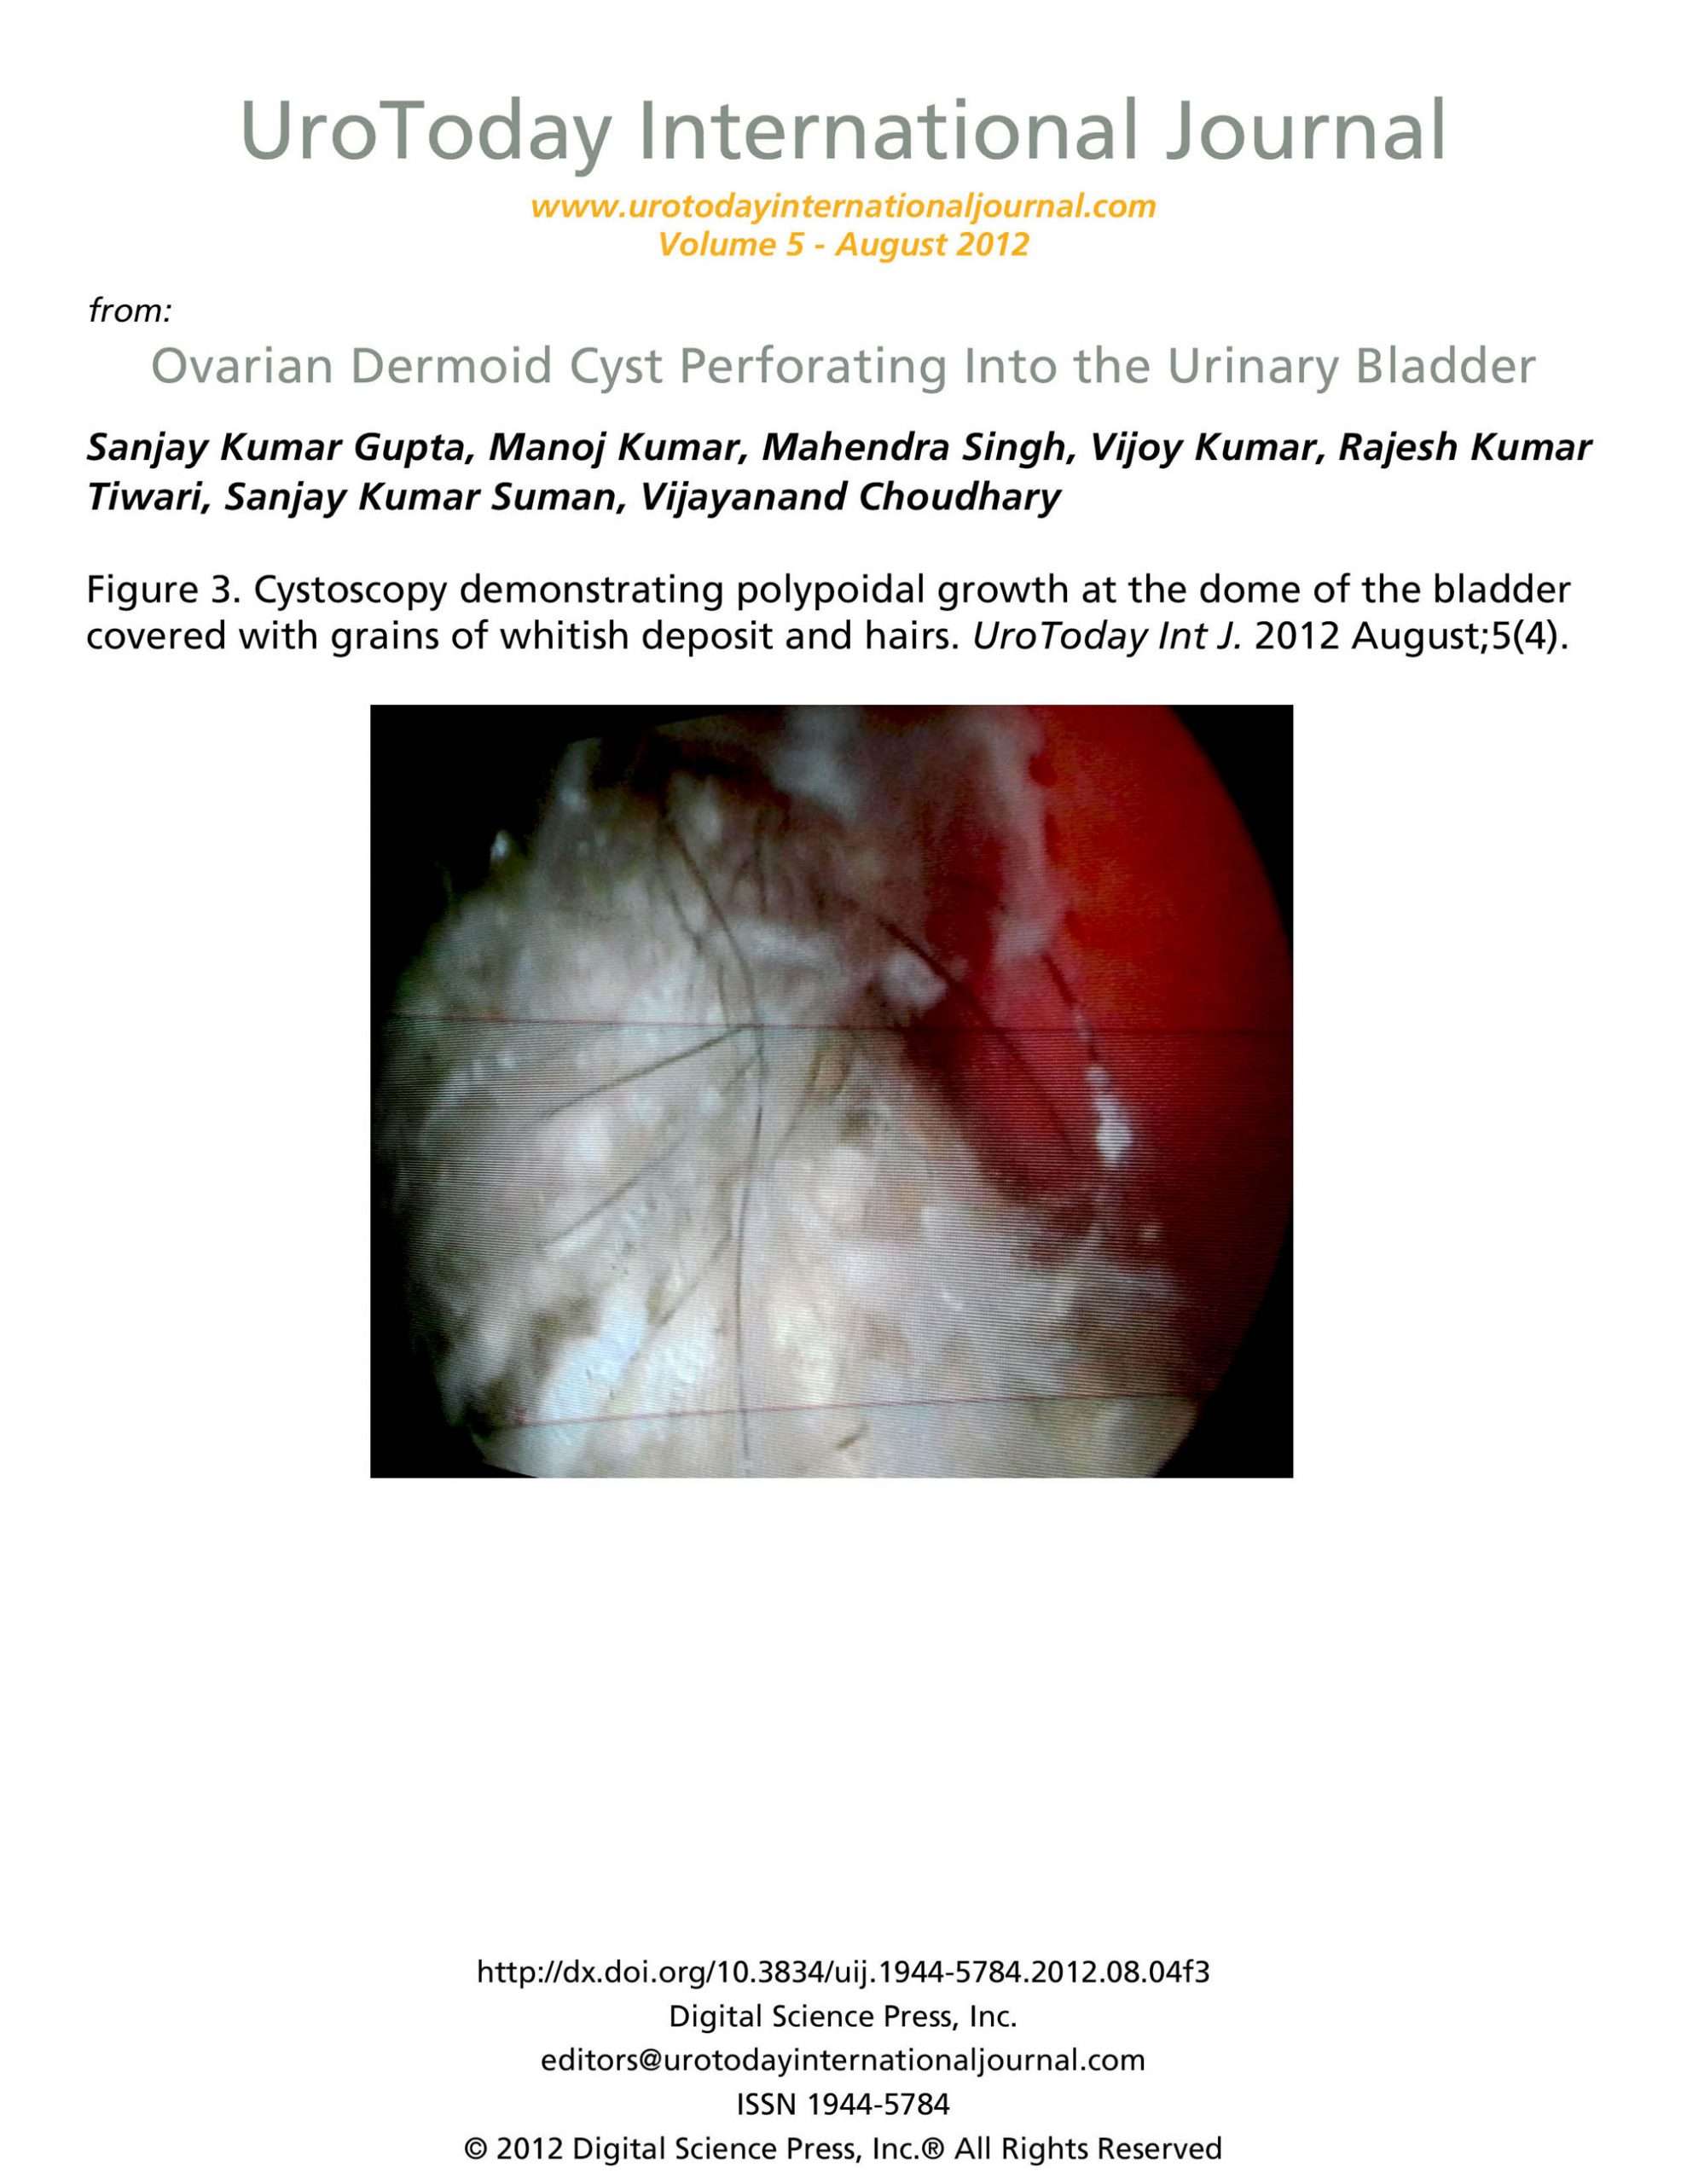 Ovarian Dermoid Cyst Perforating Into the Urinary Bladder